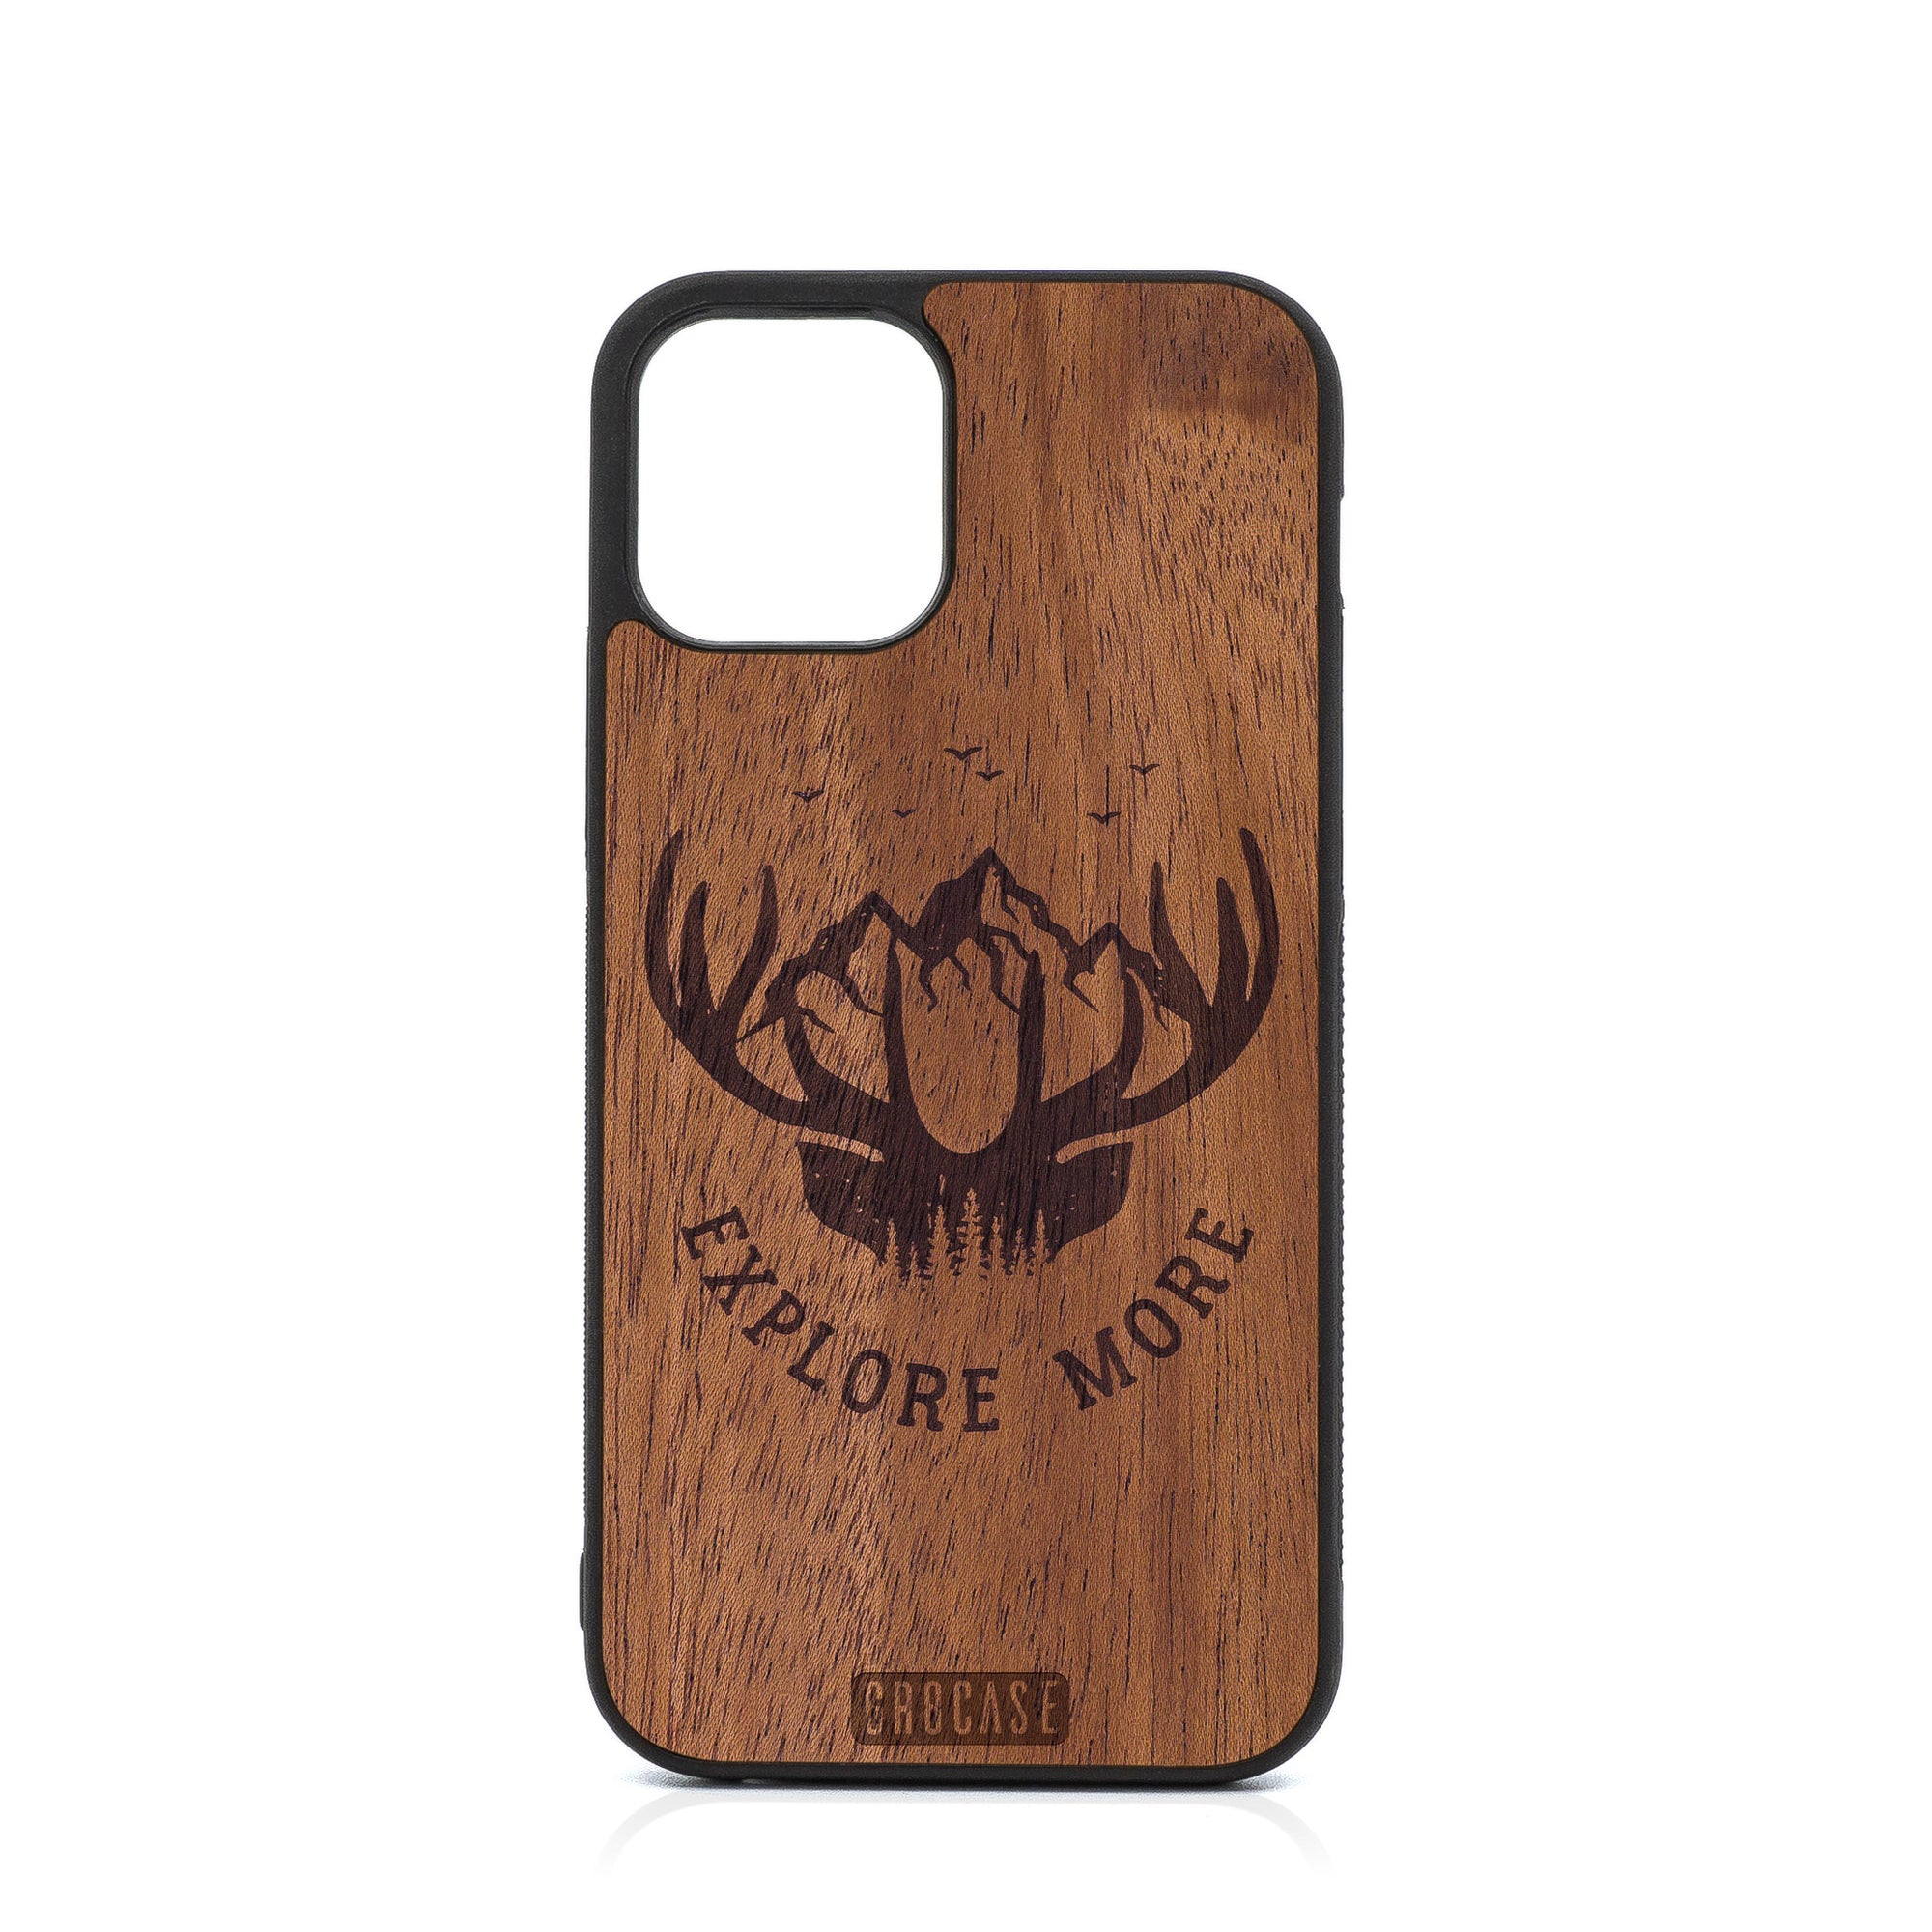 Explore More (Mountain & Antlers) Design Wood Case For iPhone 12